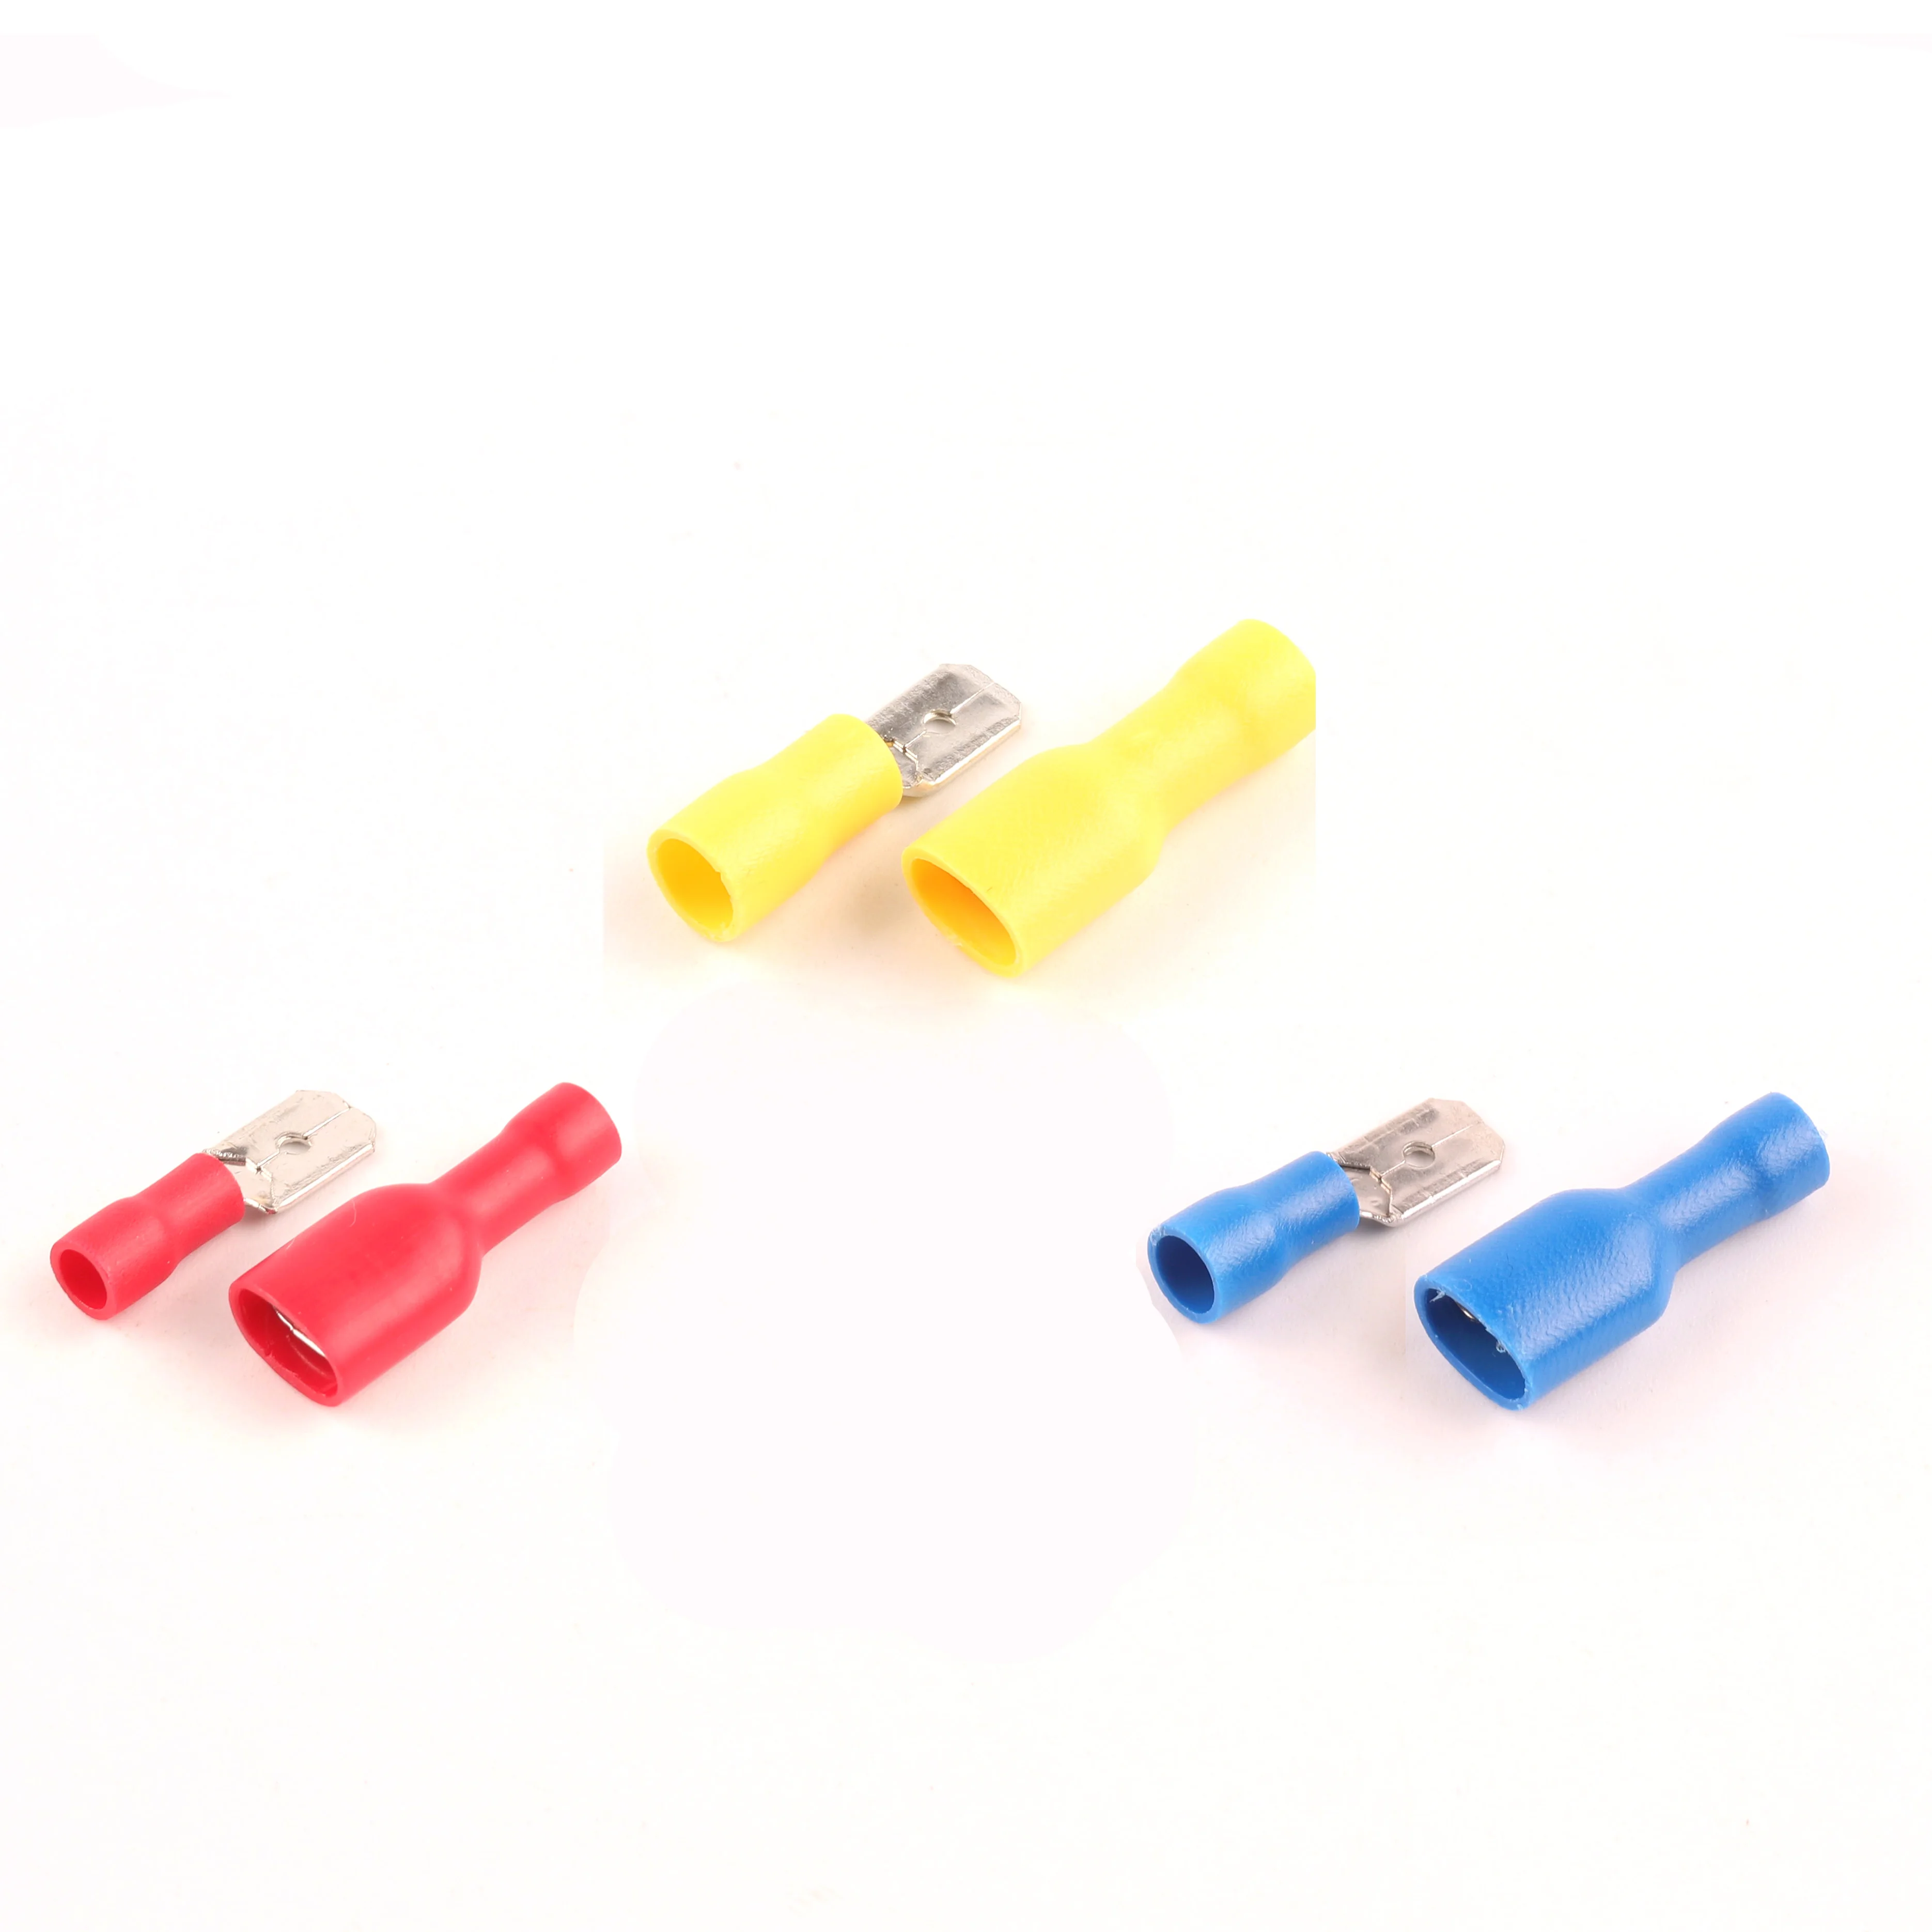 PVC Quick Butt Splice Terminals Insulated Male Female Spade Crimp Wire Cable Connector 6.3mm Terminal Connectors Cable Plug Kit